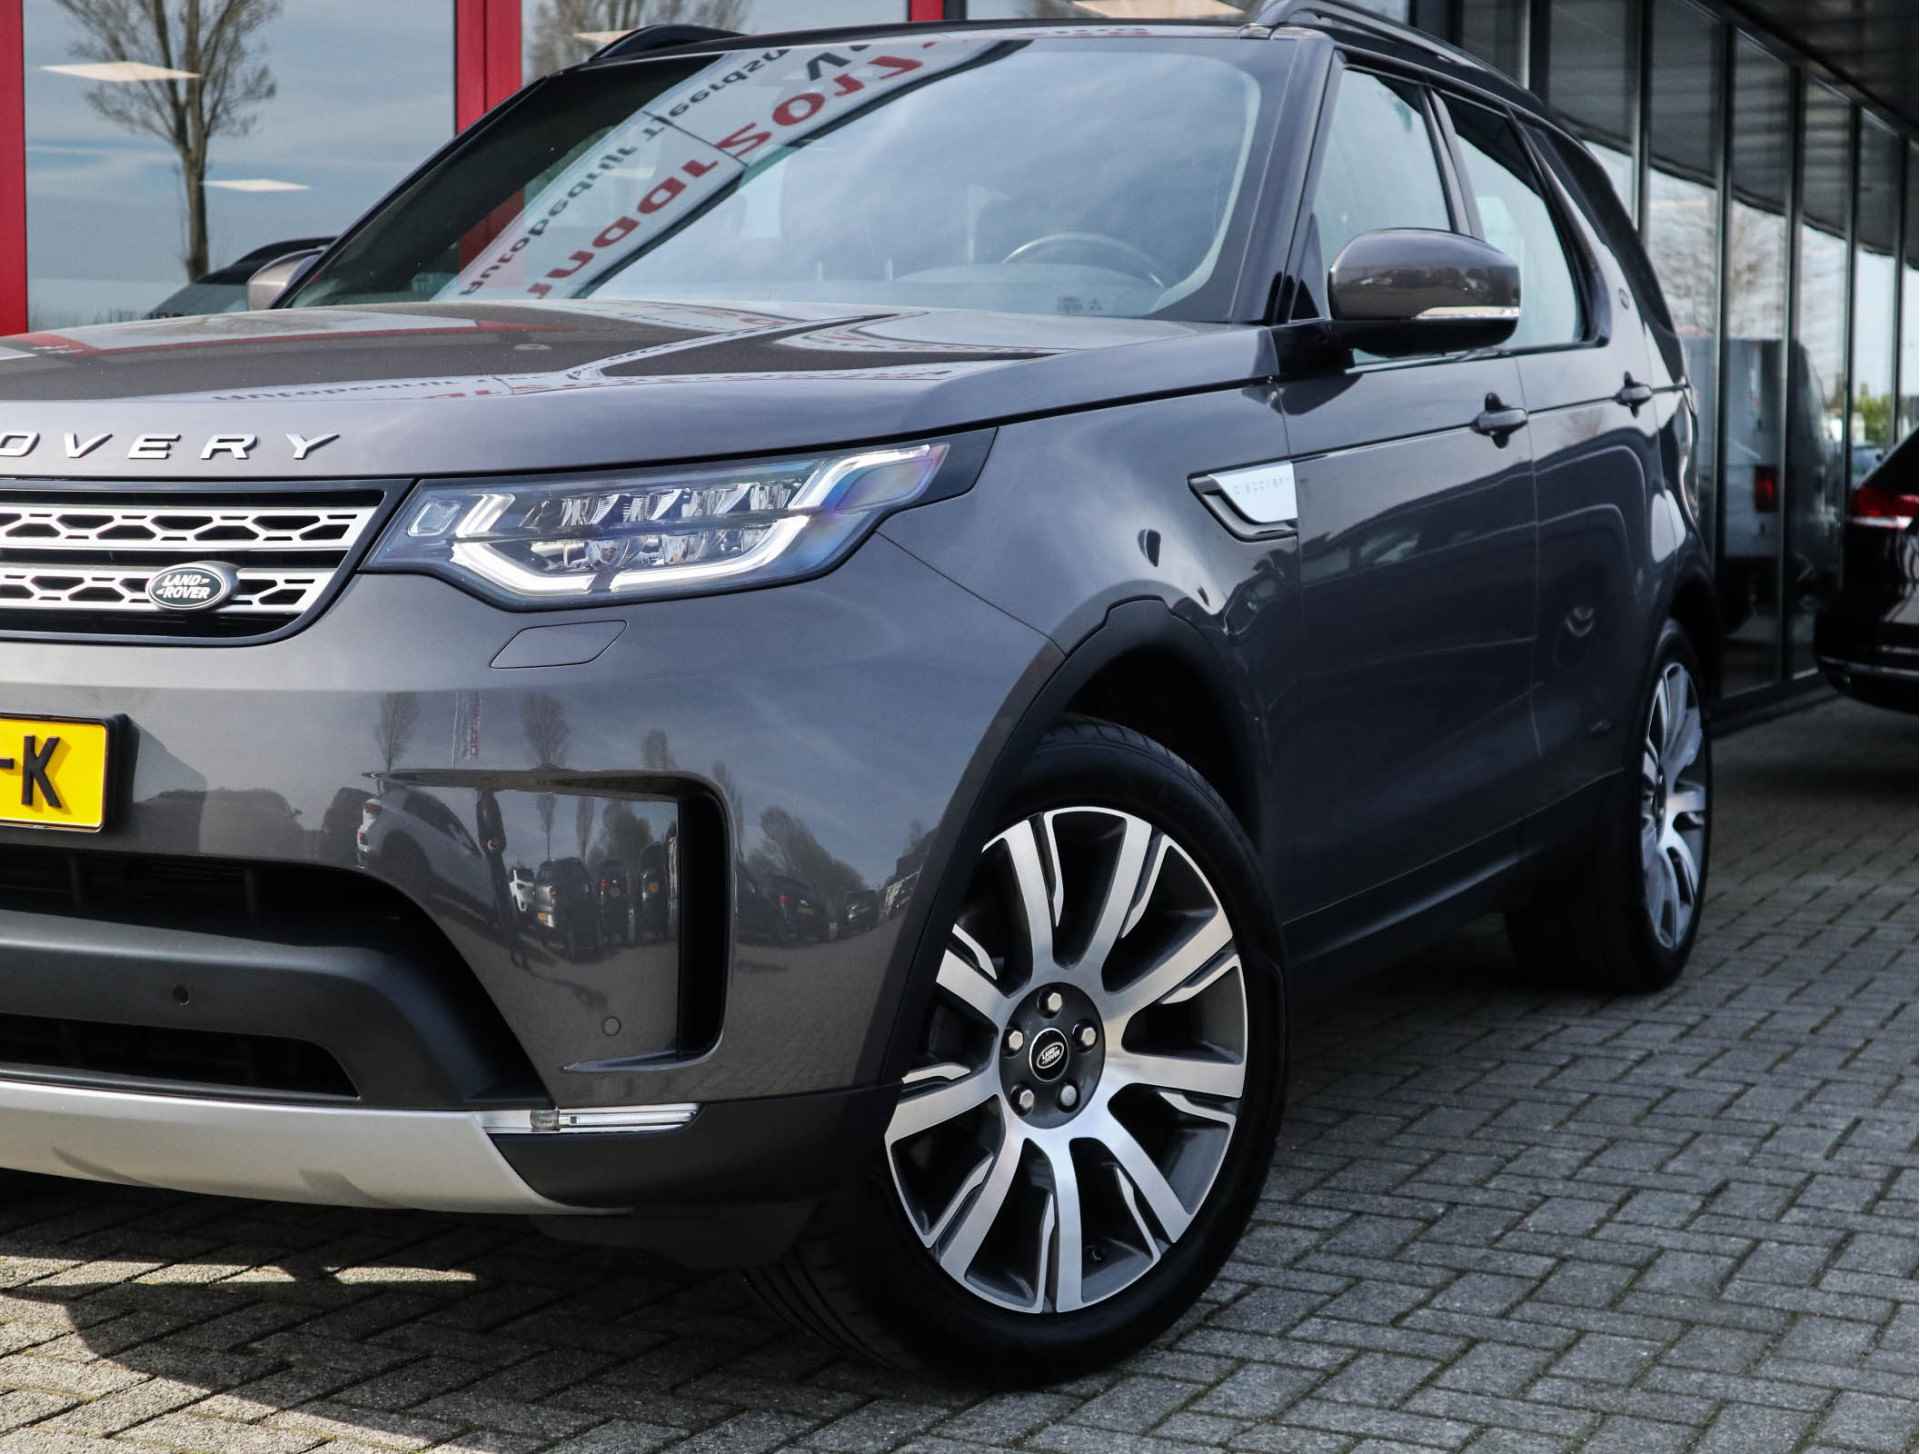 Land Rover Discovery 2.0 Sd4 HSE Luxury 7p. Navi/Clima/Leder/Panodak/7-Persoons/Luchtvering/Trekhaak - 5/34